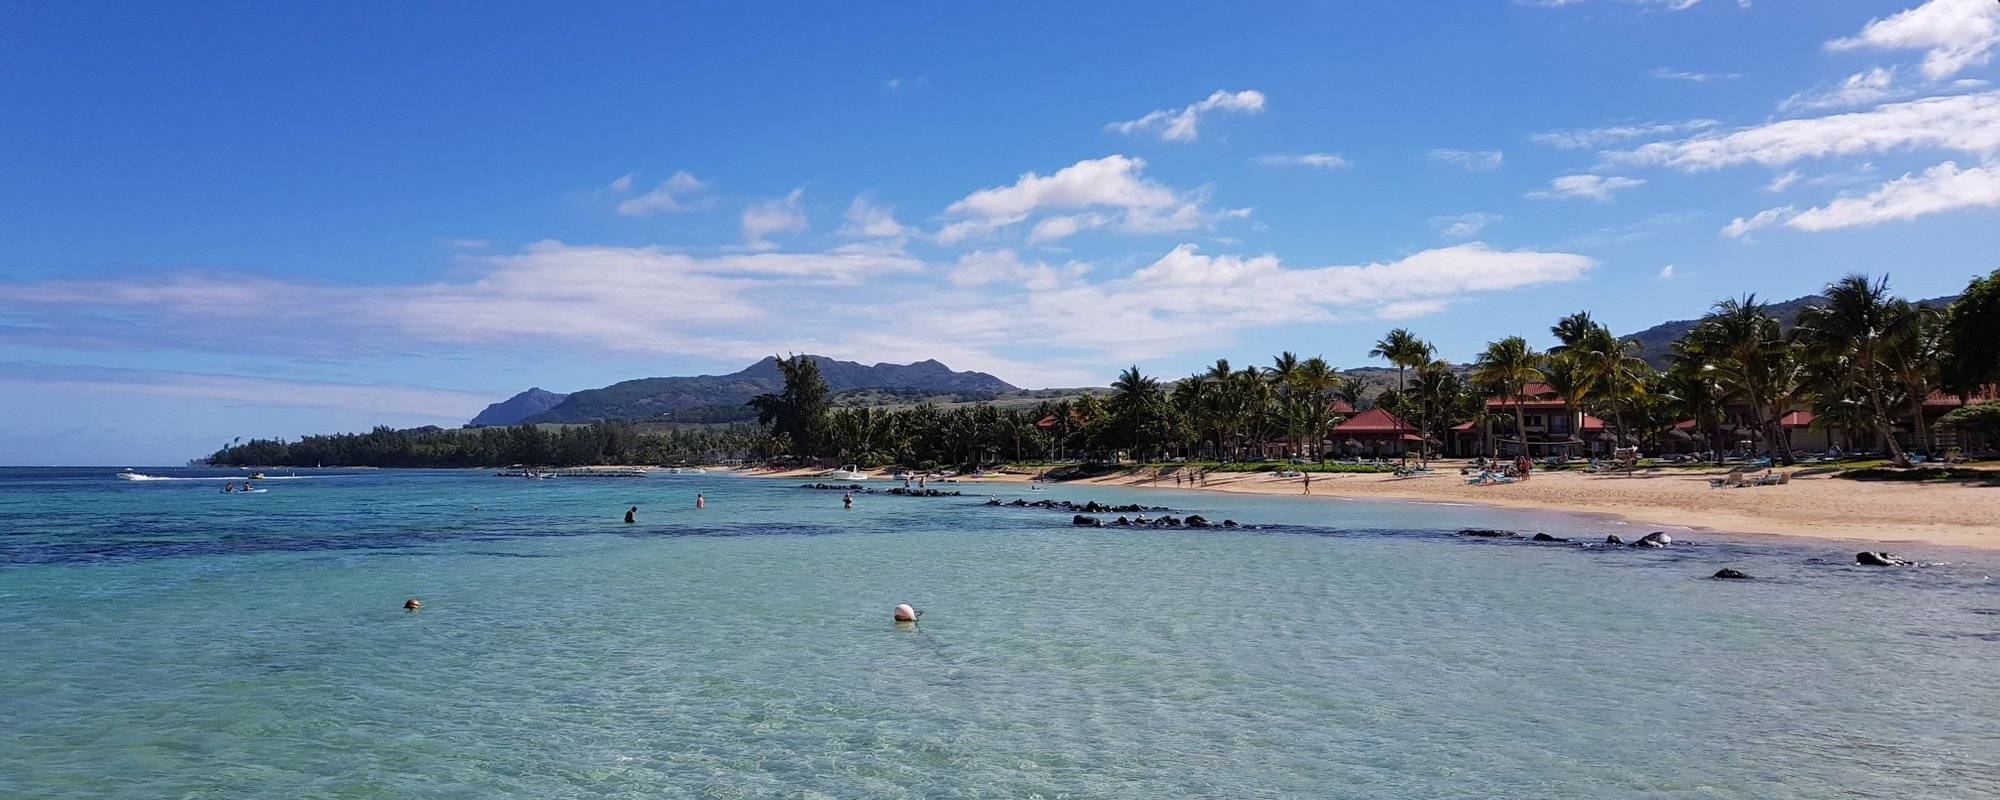 Time to travel: Mauritius Part 1